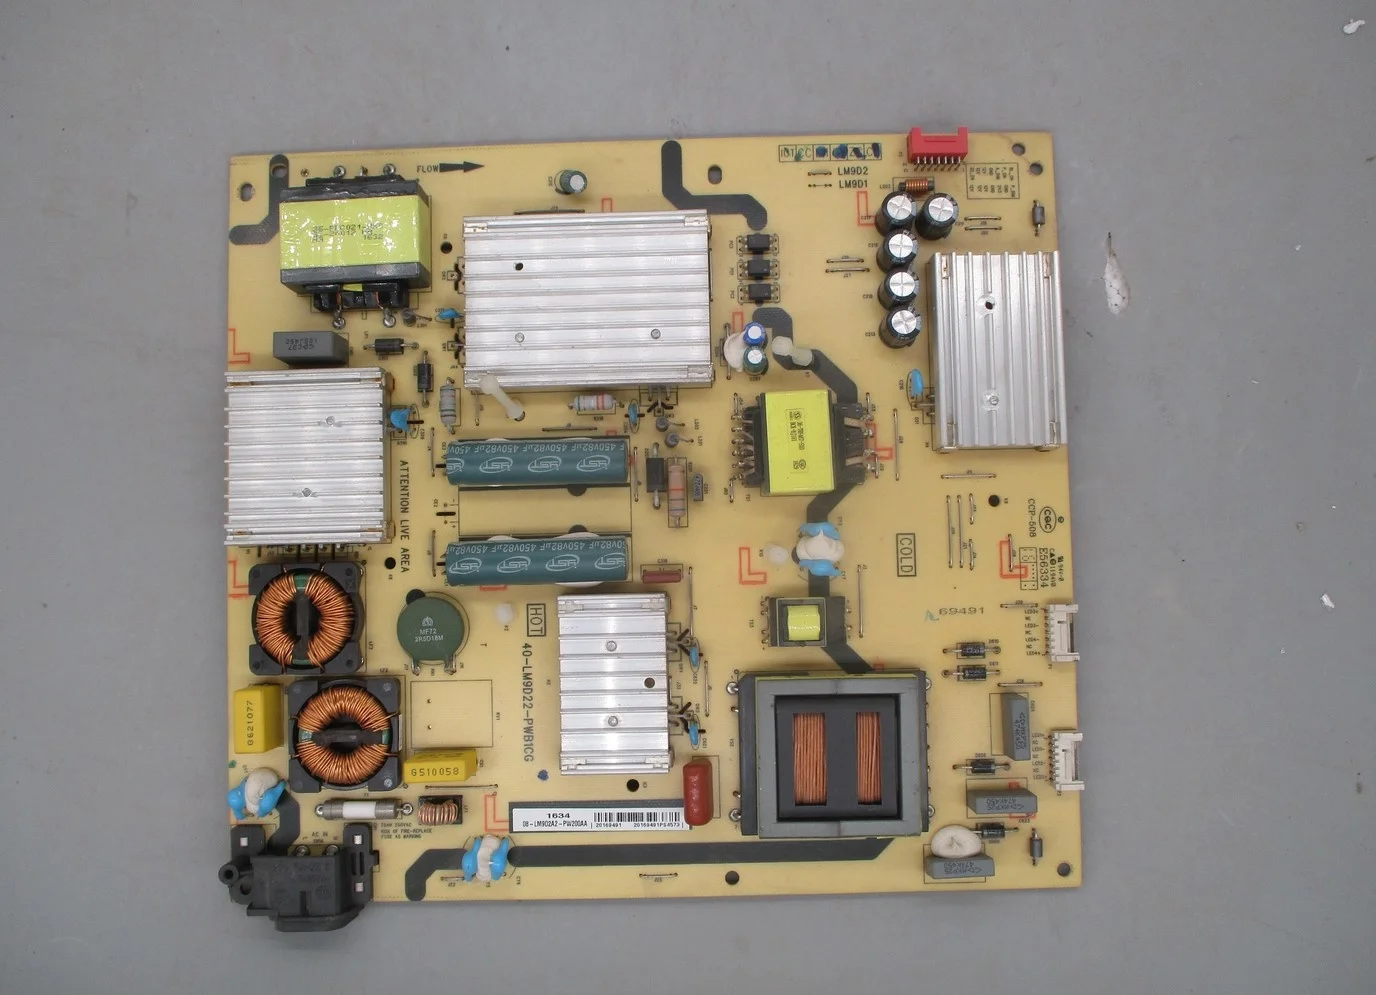 

Disassemble for TCL l55p1-cud power board 40-lm9d22-pwb1cg 08-lm9d2a2-pw200aa